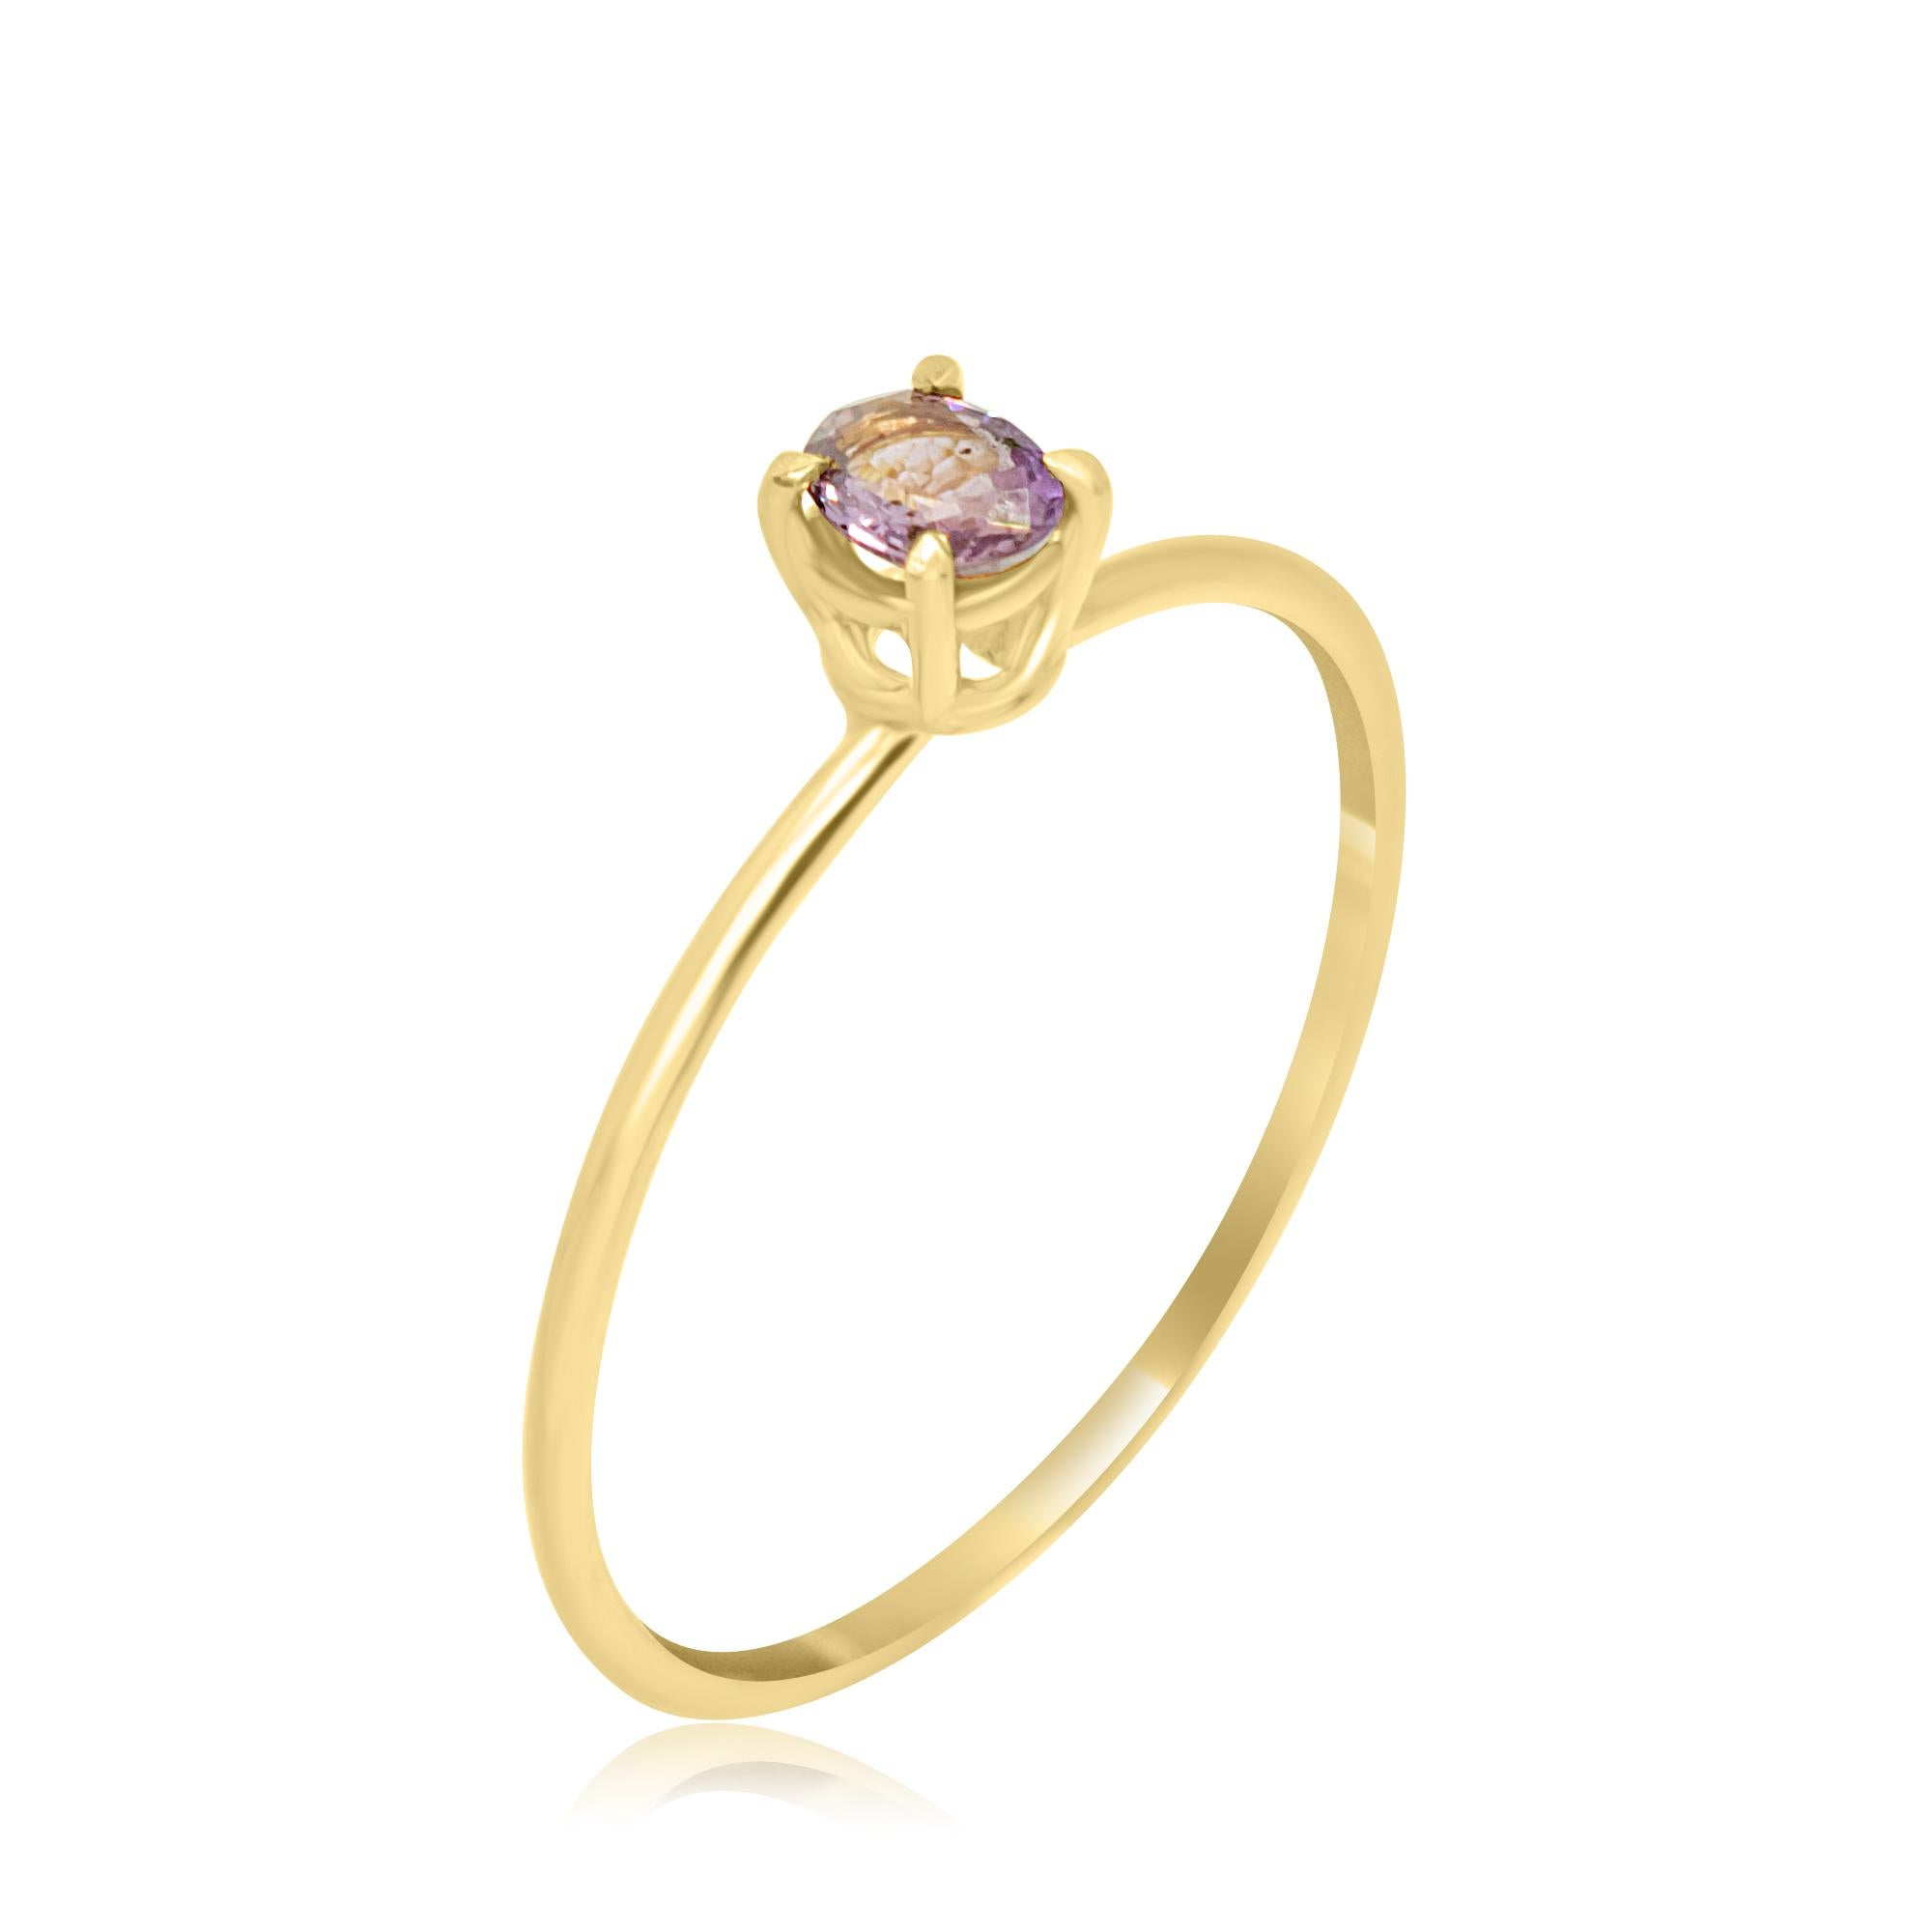 Oval precious solitaire ring design, with shining sparkles. 0.3 carat Blue Sapphire on 18 karat yellow gold ring inspired by the joy of summer sunsets. With a perfect size, it will fill with your daily elegant outfits.

• 18 karat yellow gold (750